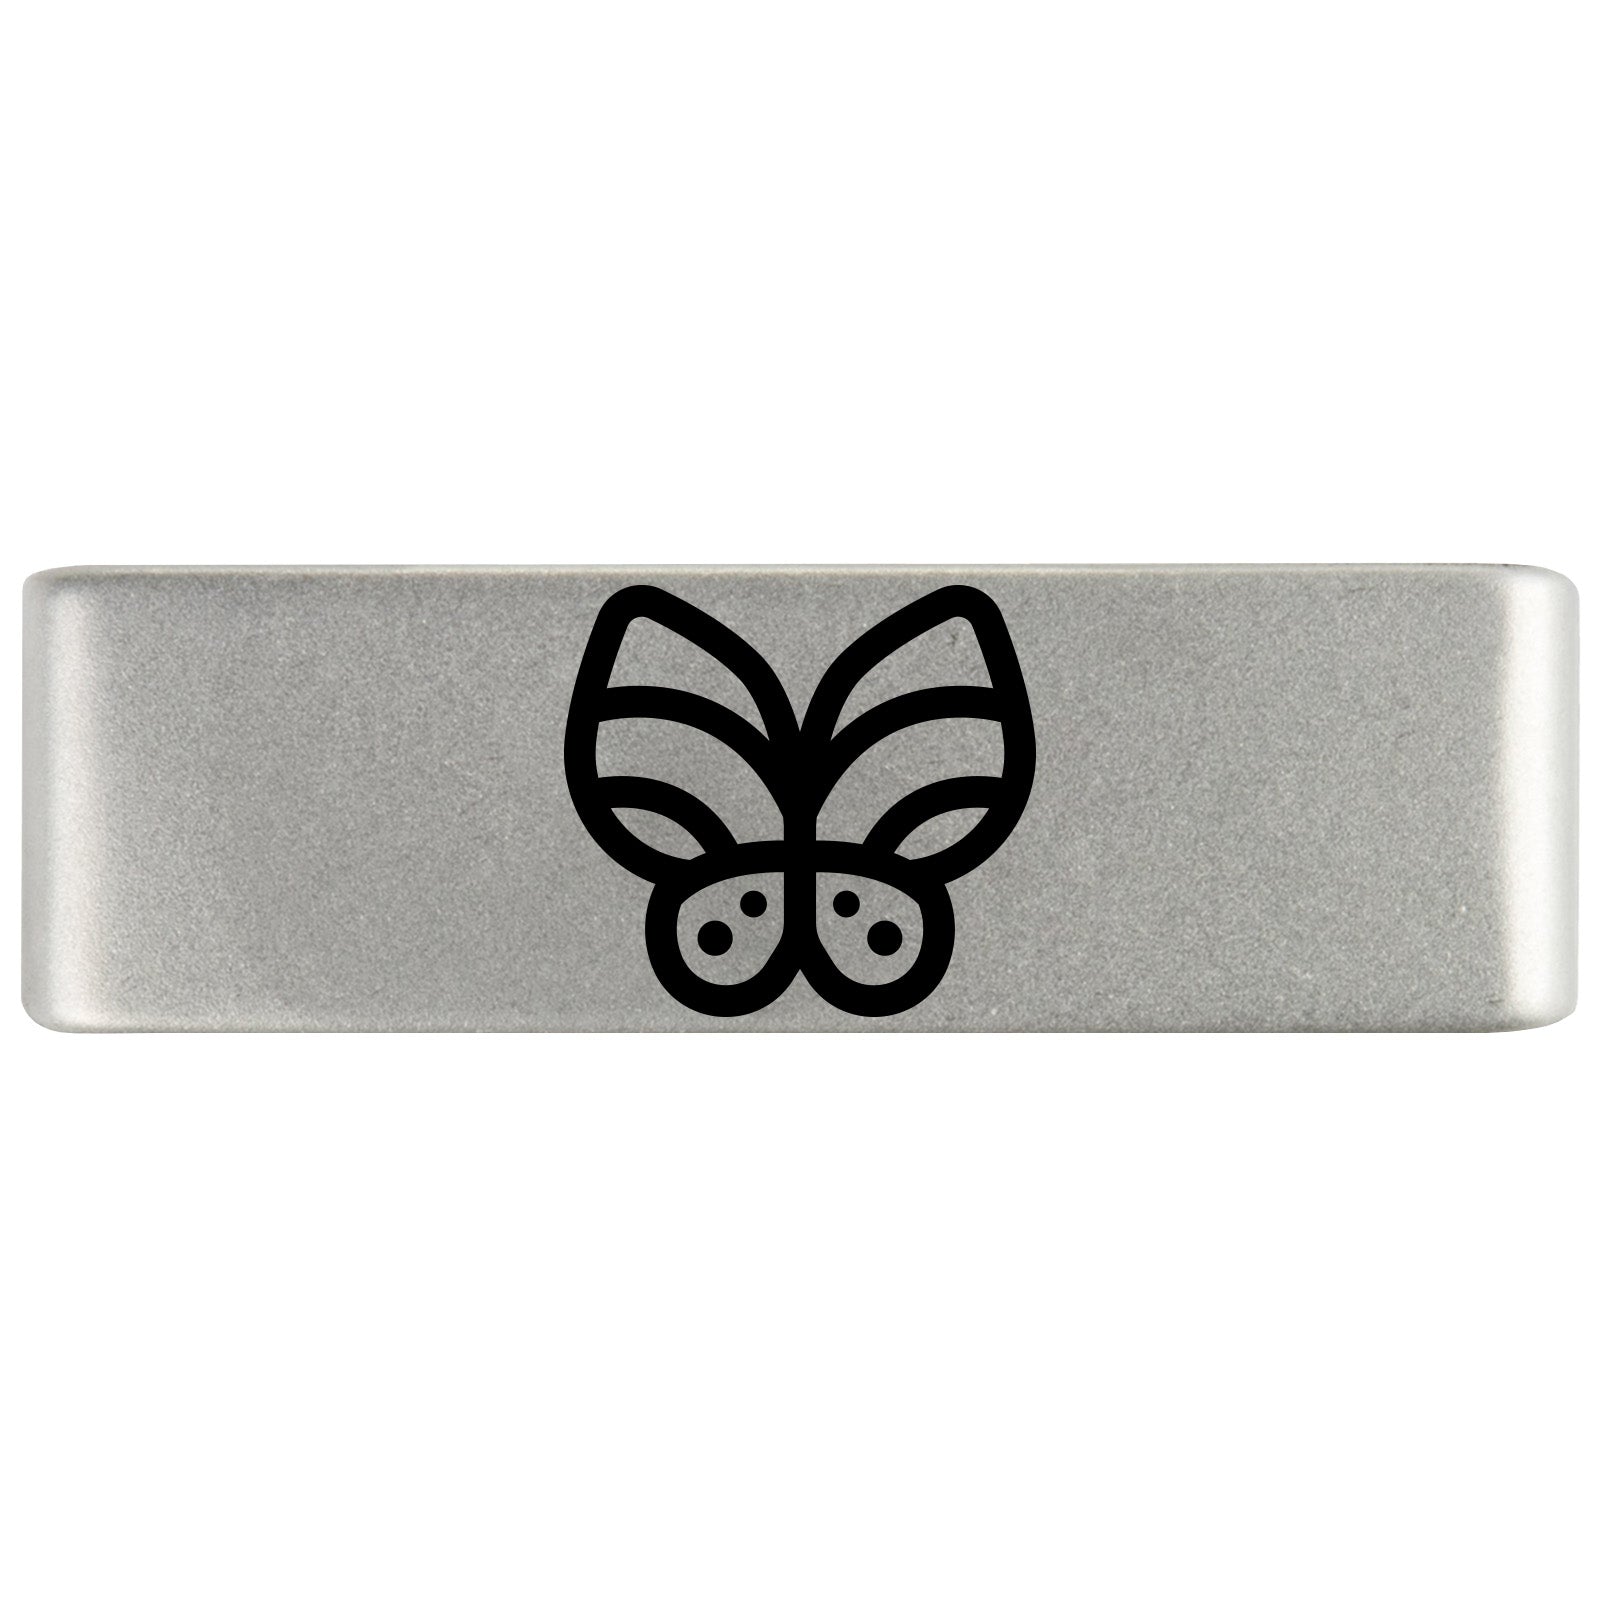 Butterfly Badge Badge 19mm - ROAD iD